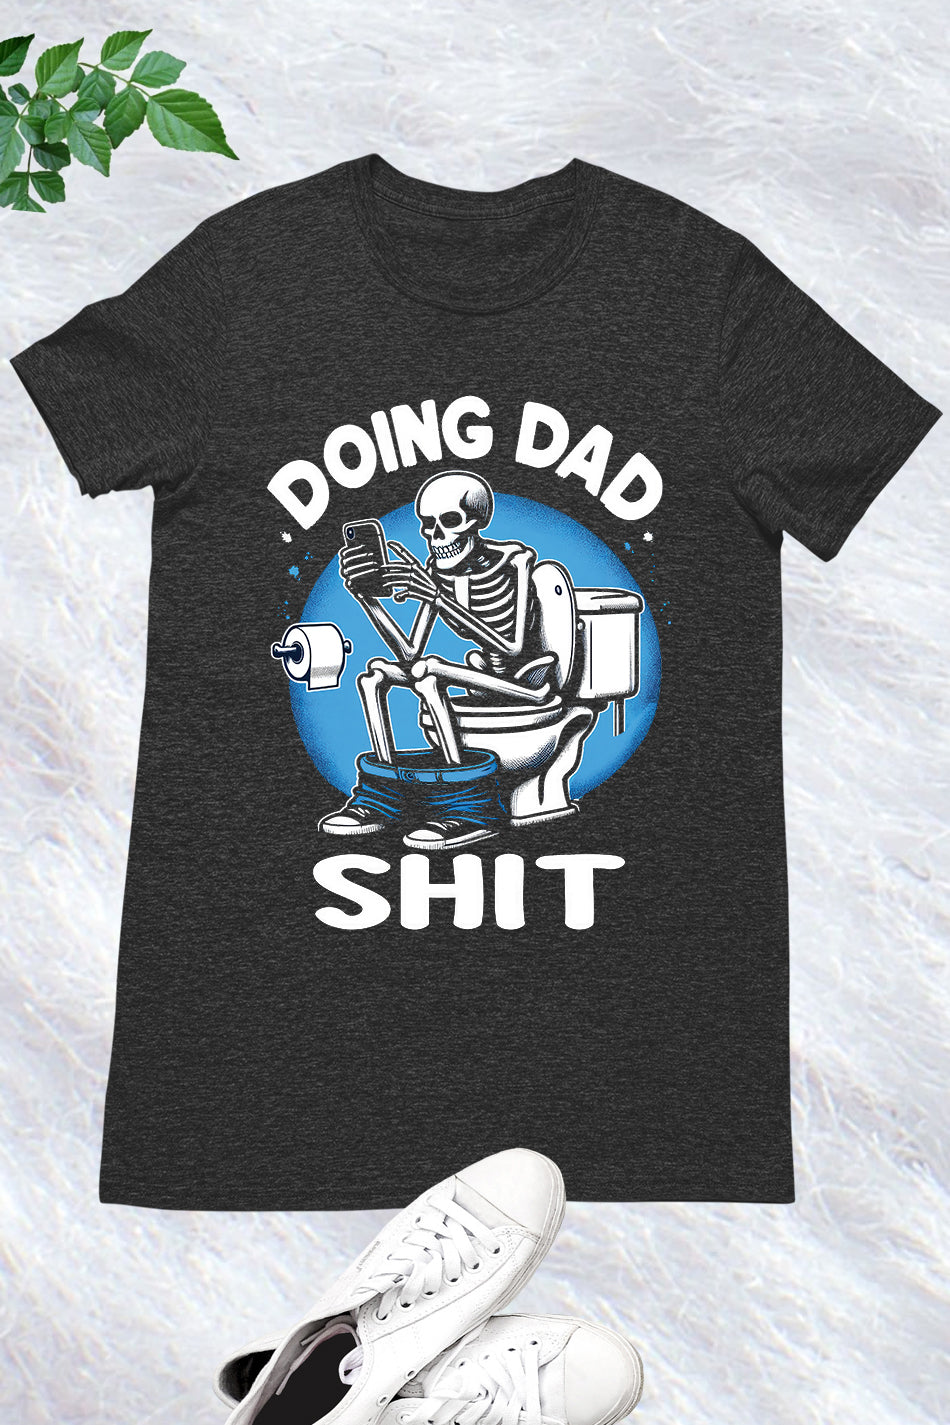 Doing Dad Shit Funny Tees